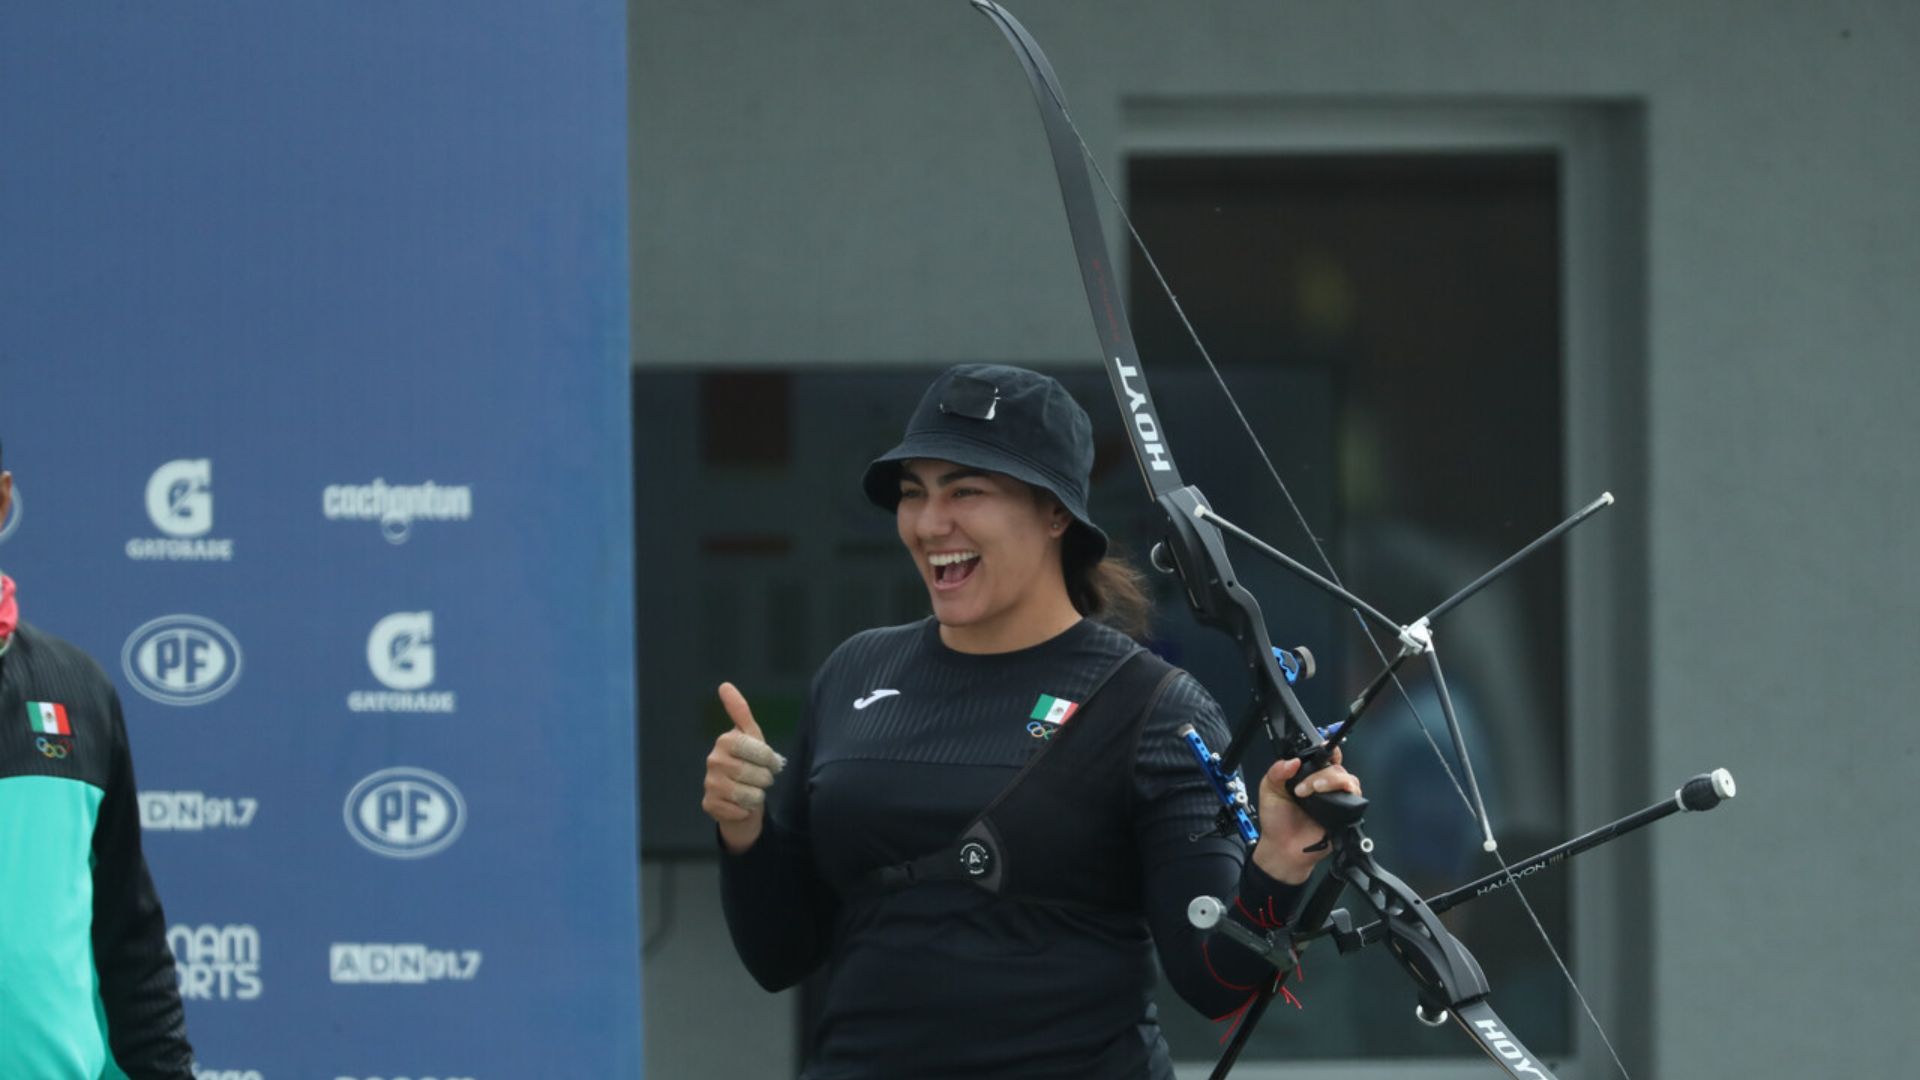 Archery: Mexico secures the individual recurve gold